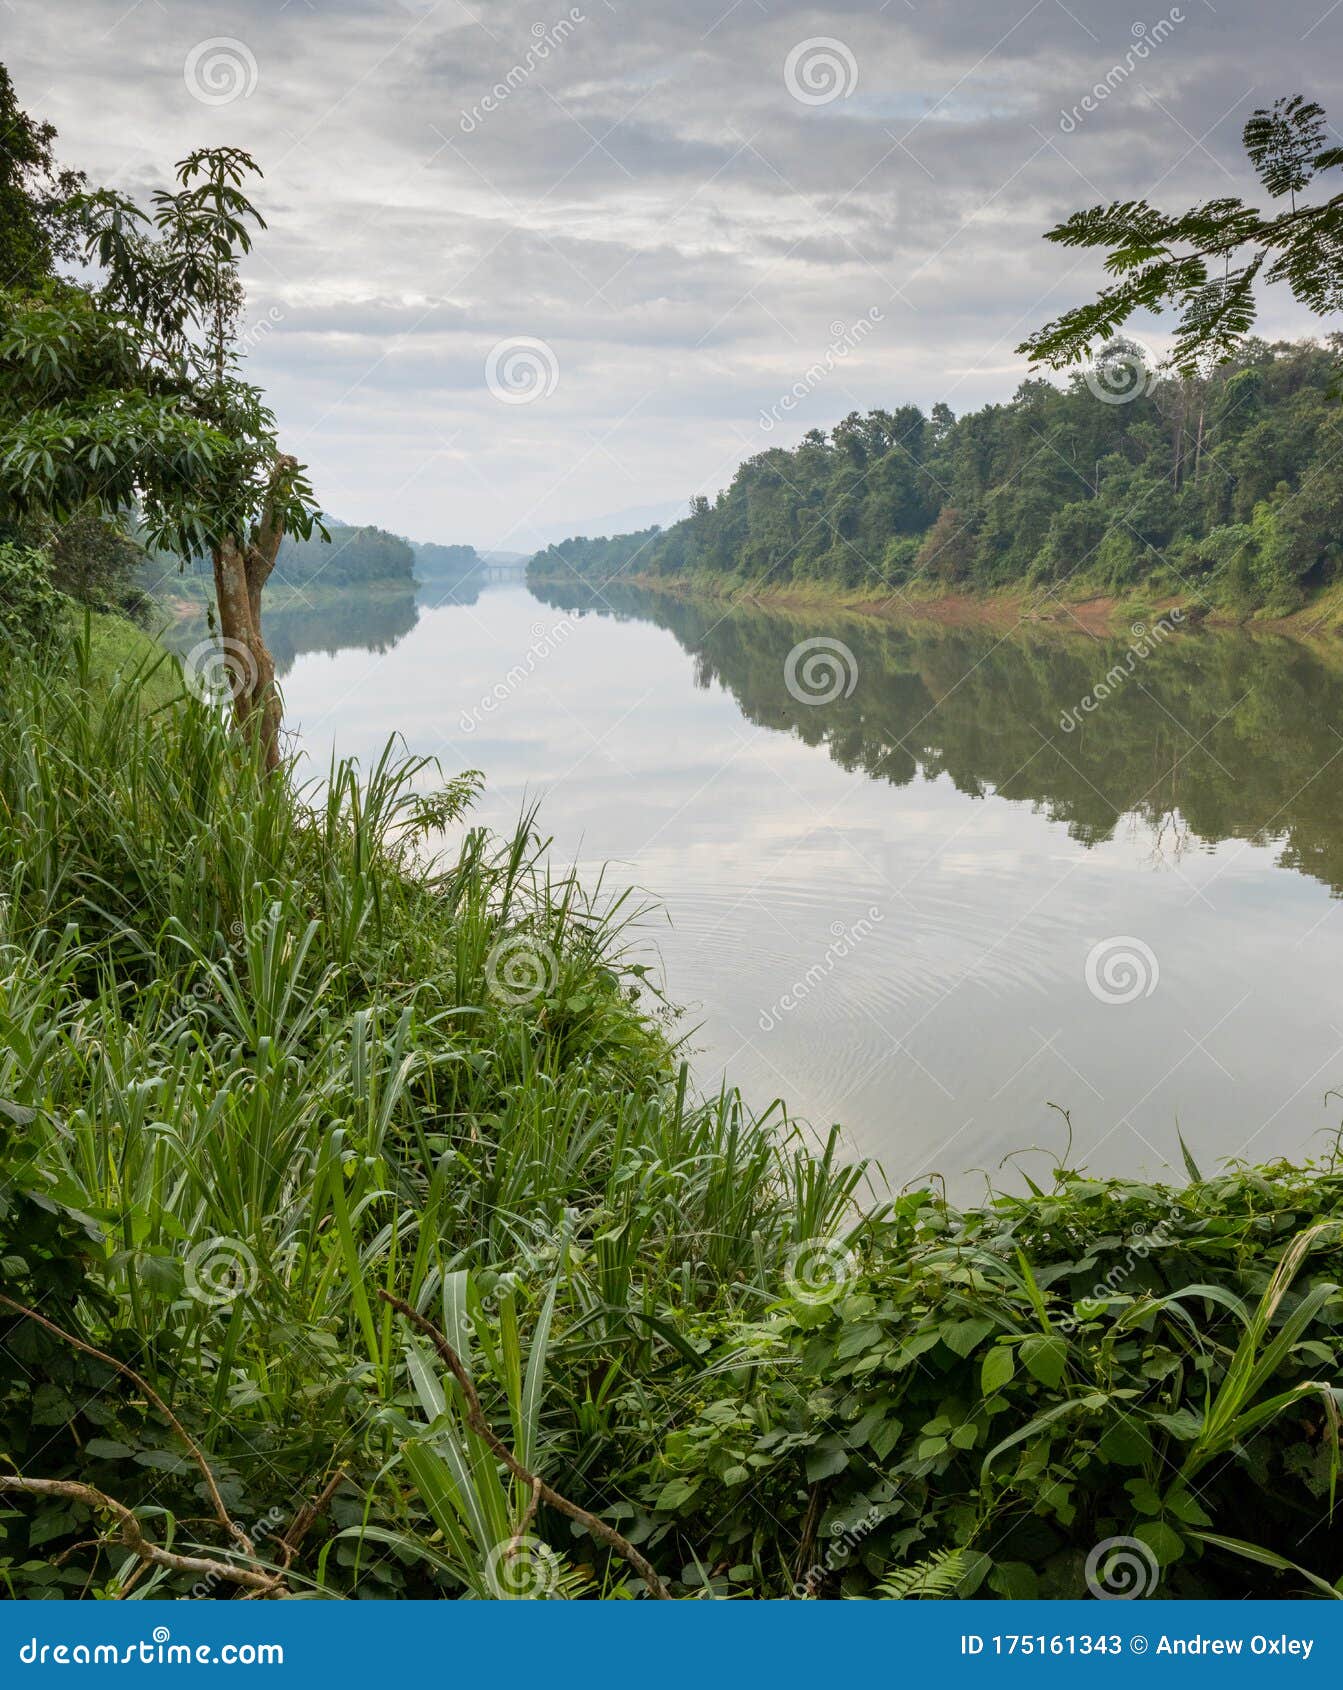 Landcape Image of the Periyar River in Kerala, India Stock Image - Image of  sunny, rural: 175161343